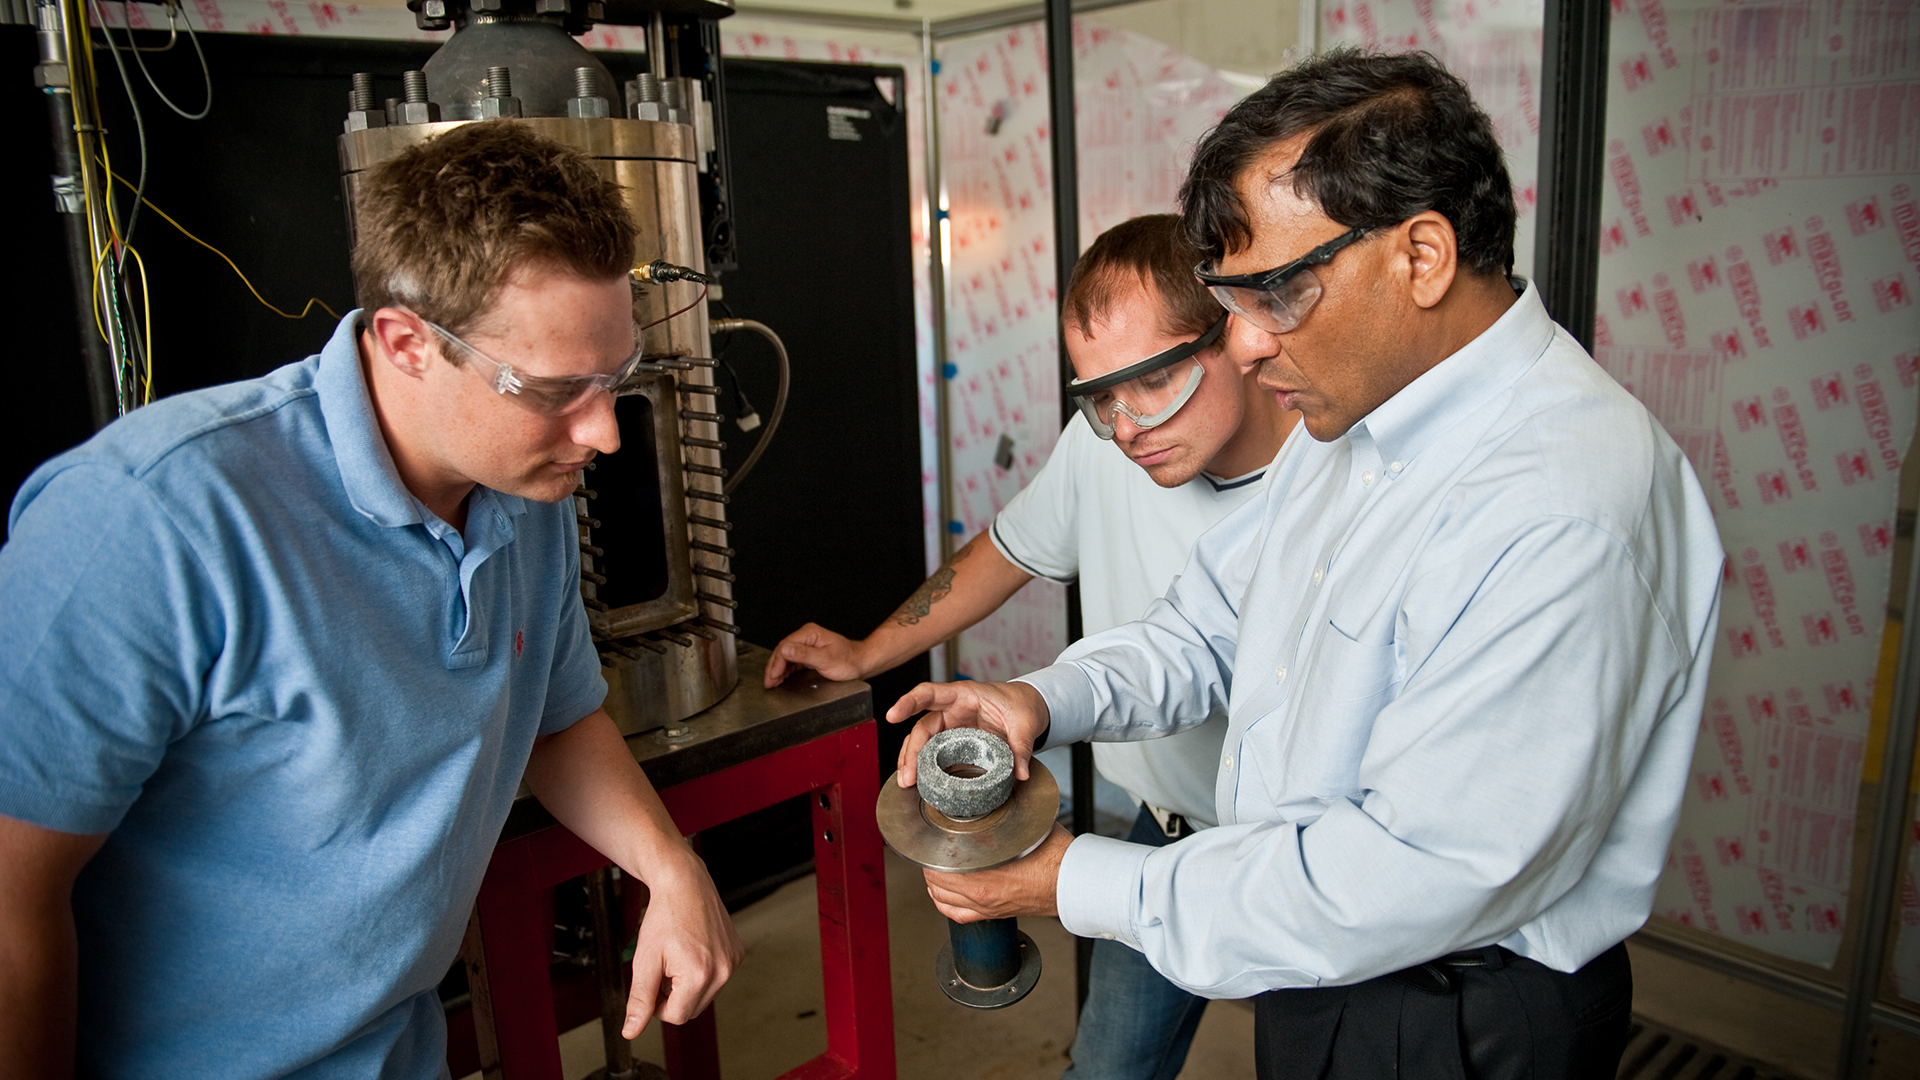 Dr. Ajay Agrawal shows a round piece of machinery to 2 students